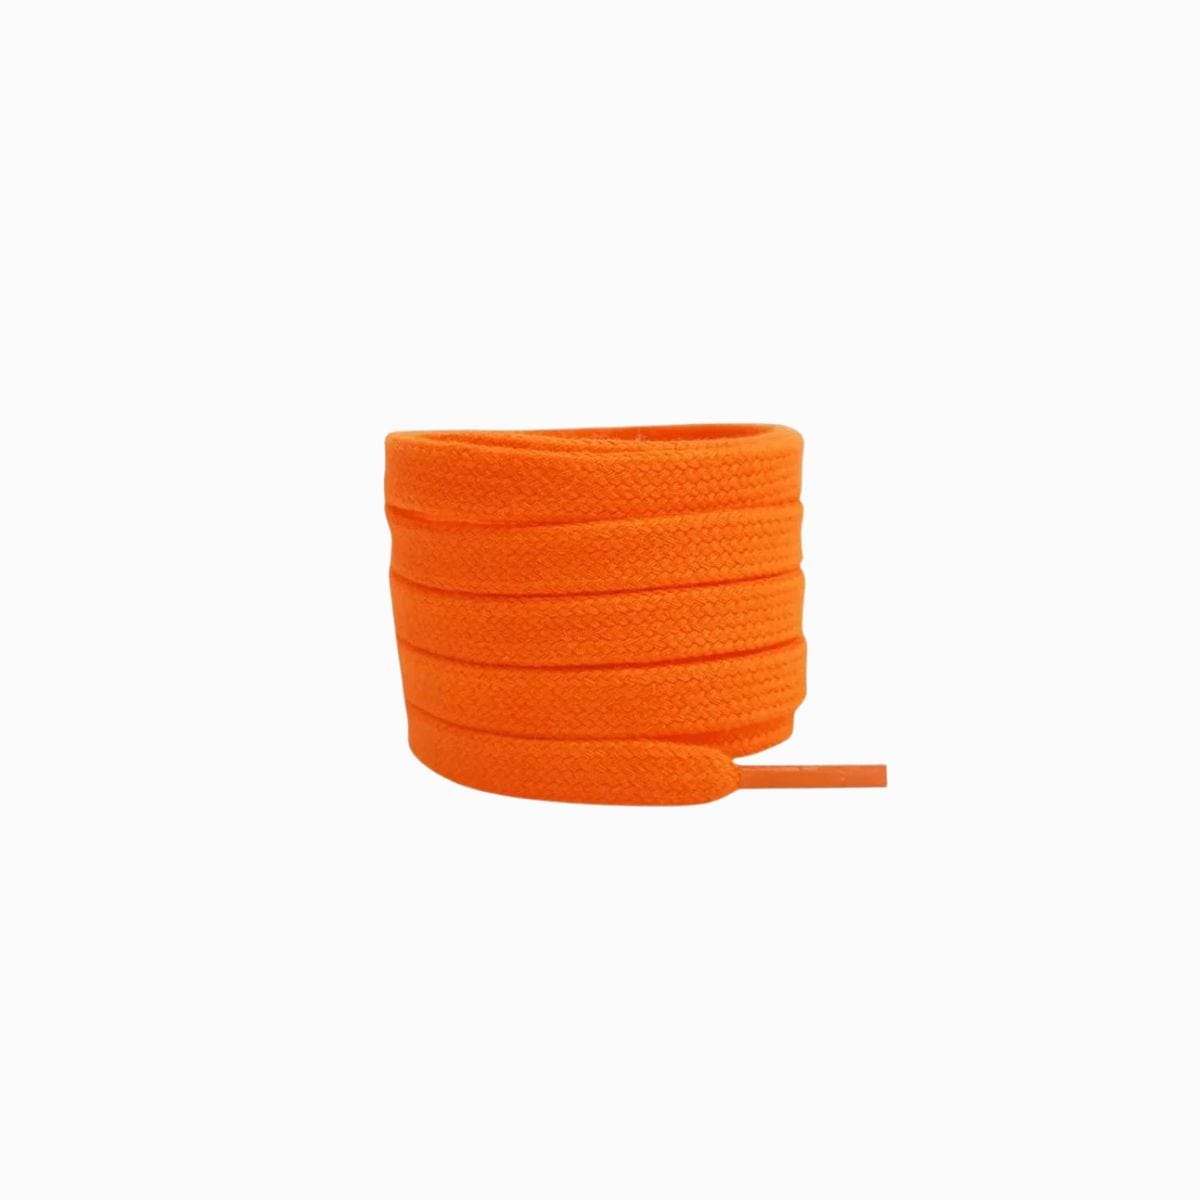 Orange Replacement Adidas Shoe Laces for Adidas Gazelle Sneakers by Kicks Shoelaces